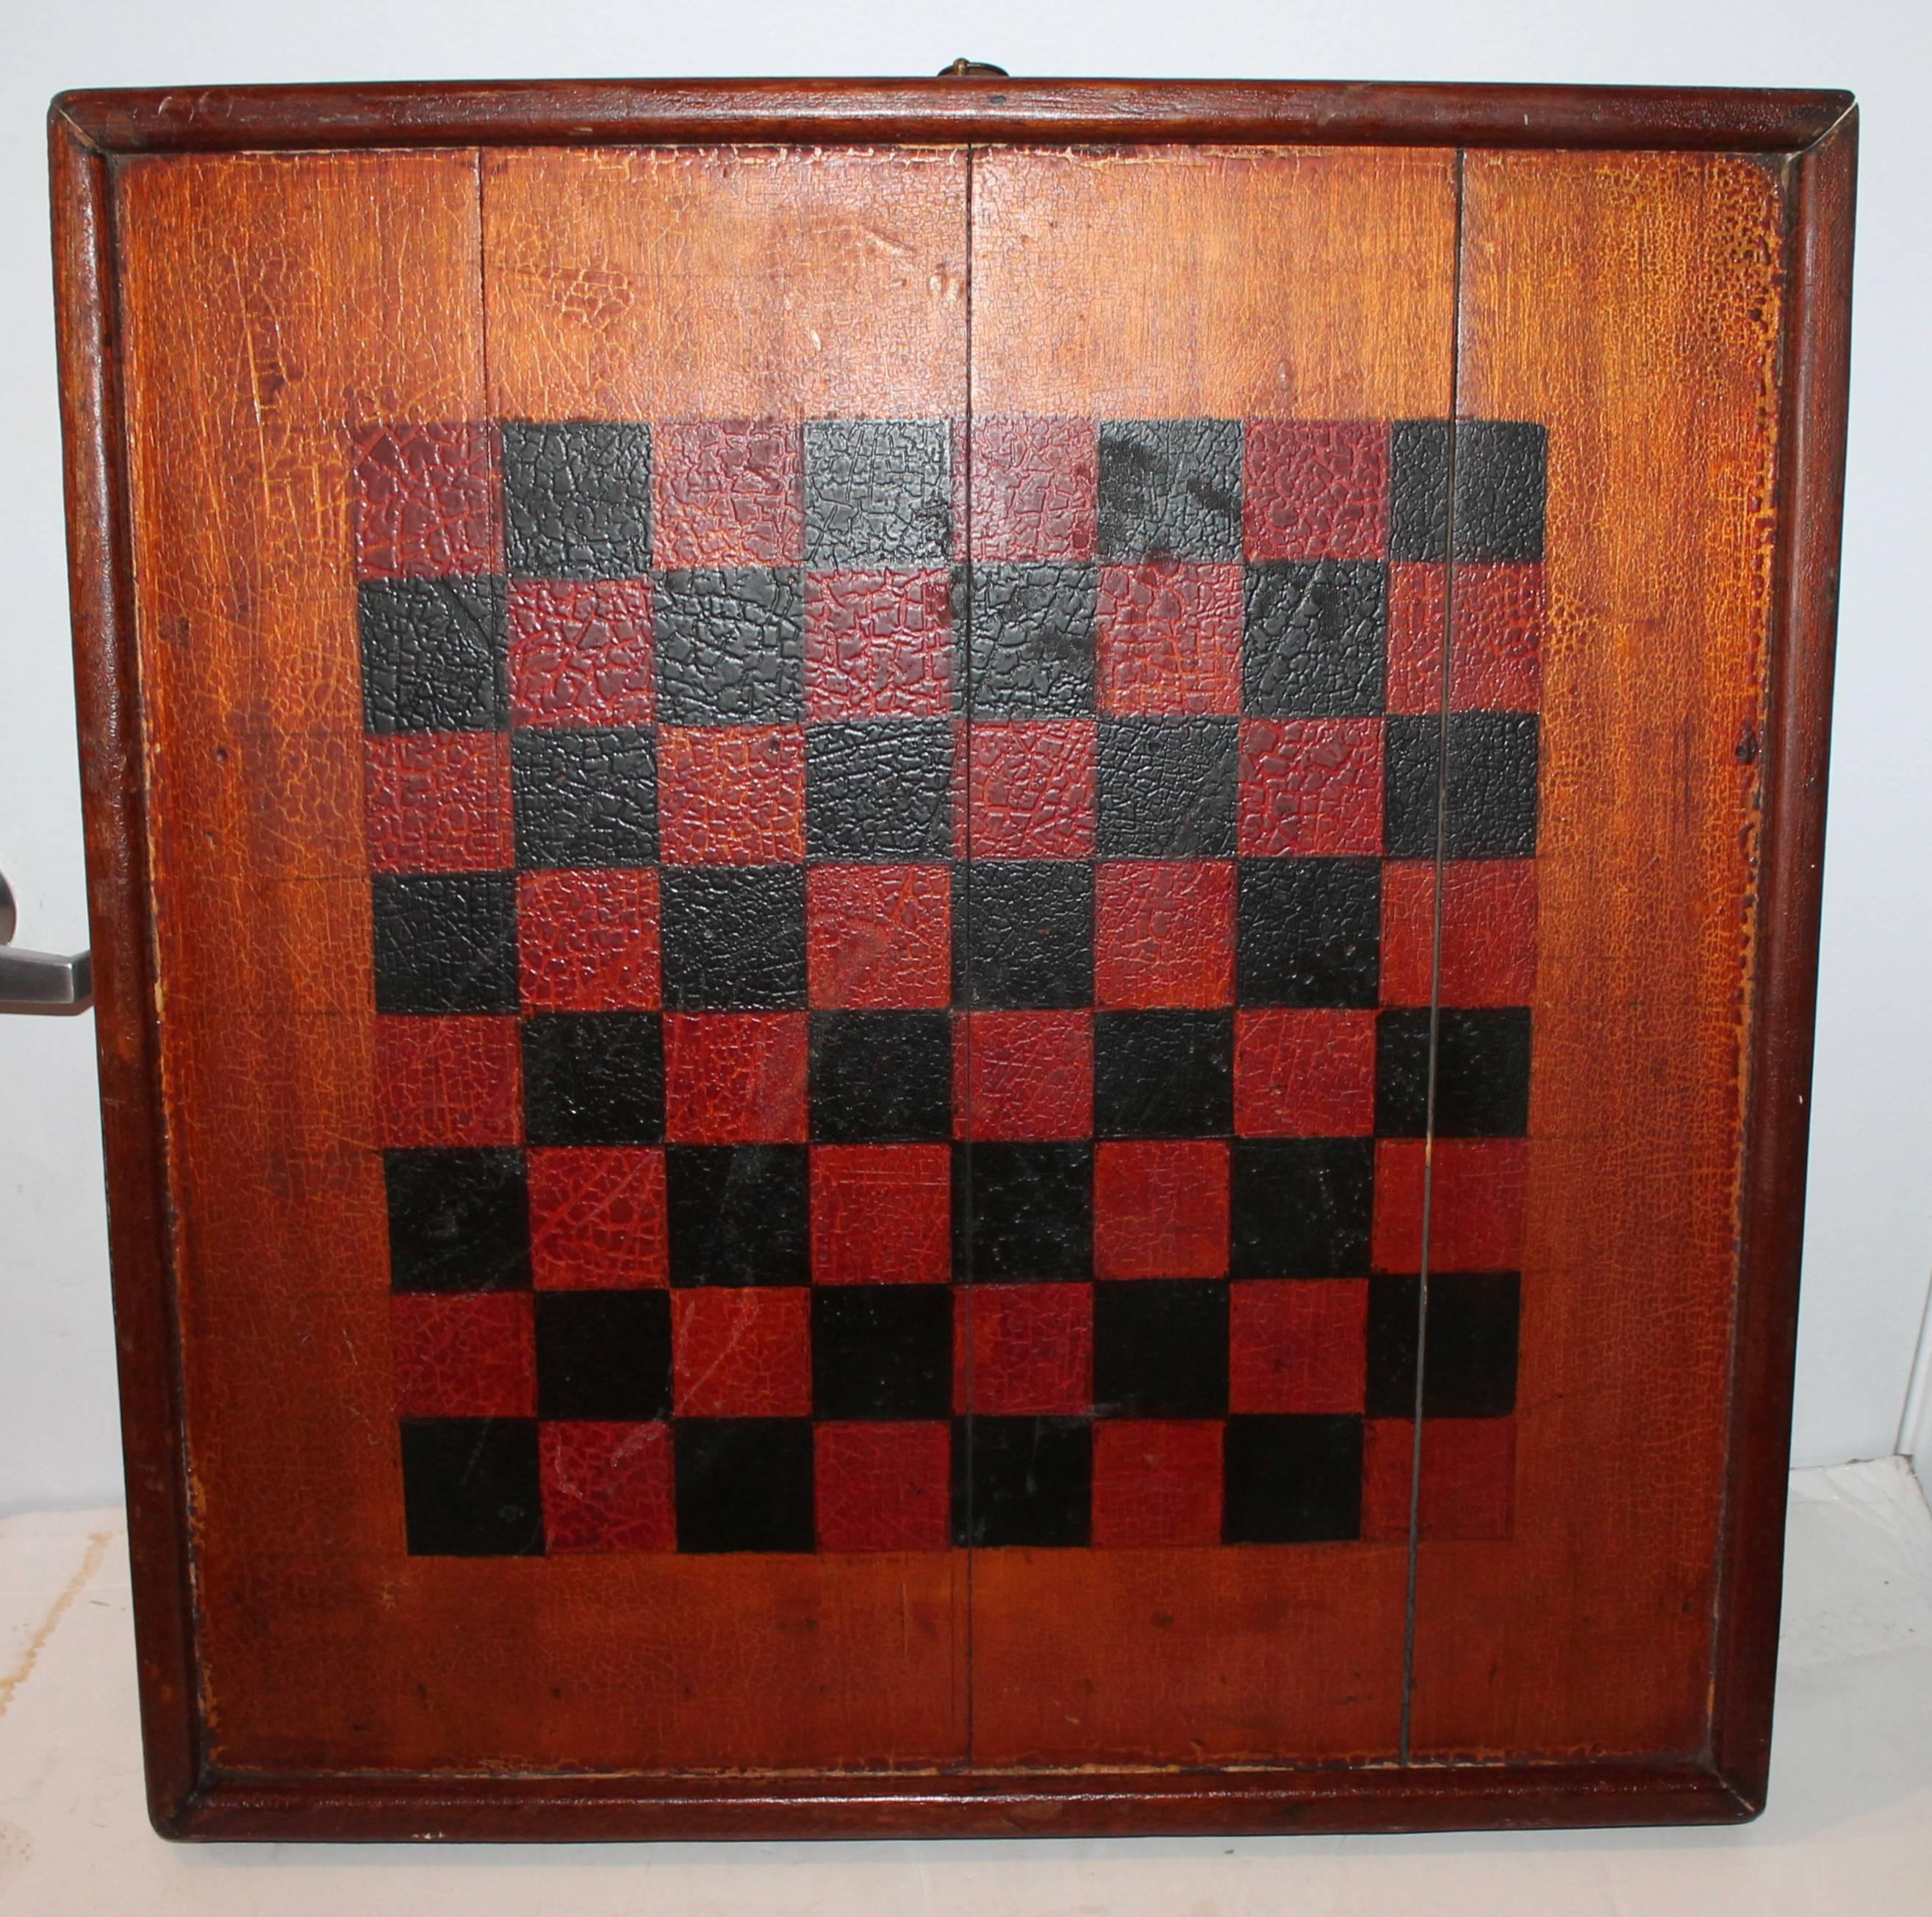 This double-sided original painted monumental Chinese checkers and checker board in one has a spectacular grungy undisturbed surface. This thick board has the original brass hanger on top. The condition is very good. This is a one of a kind handmade